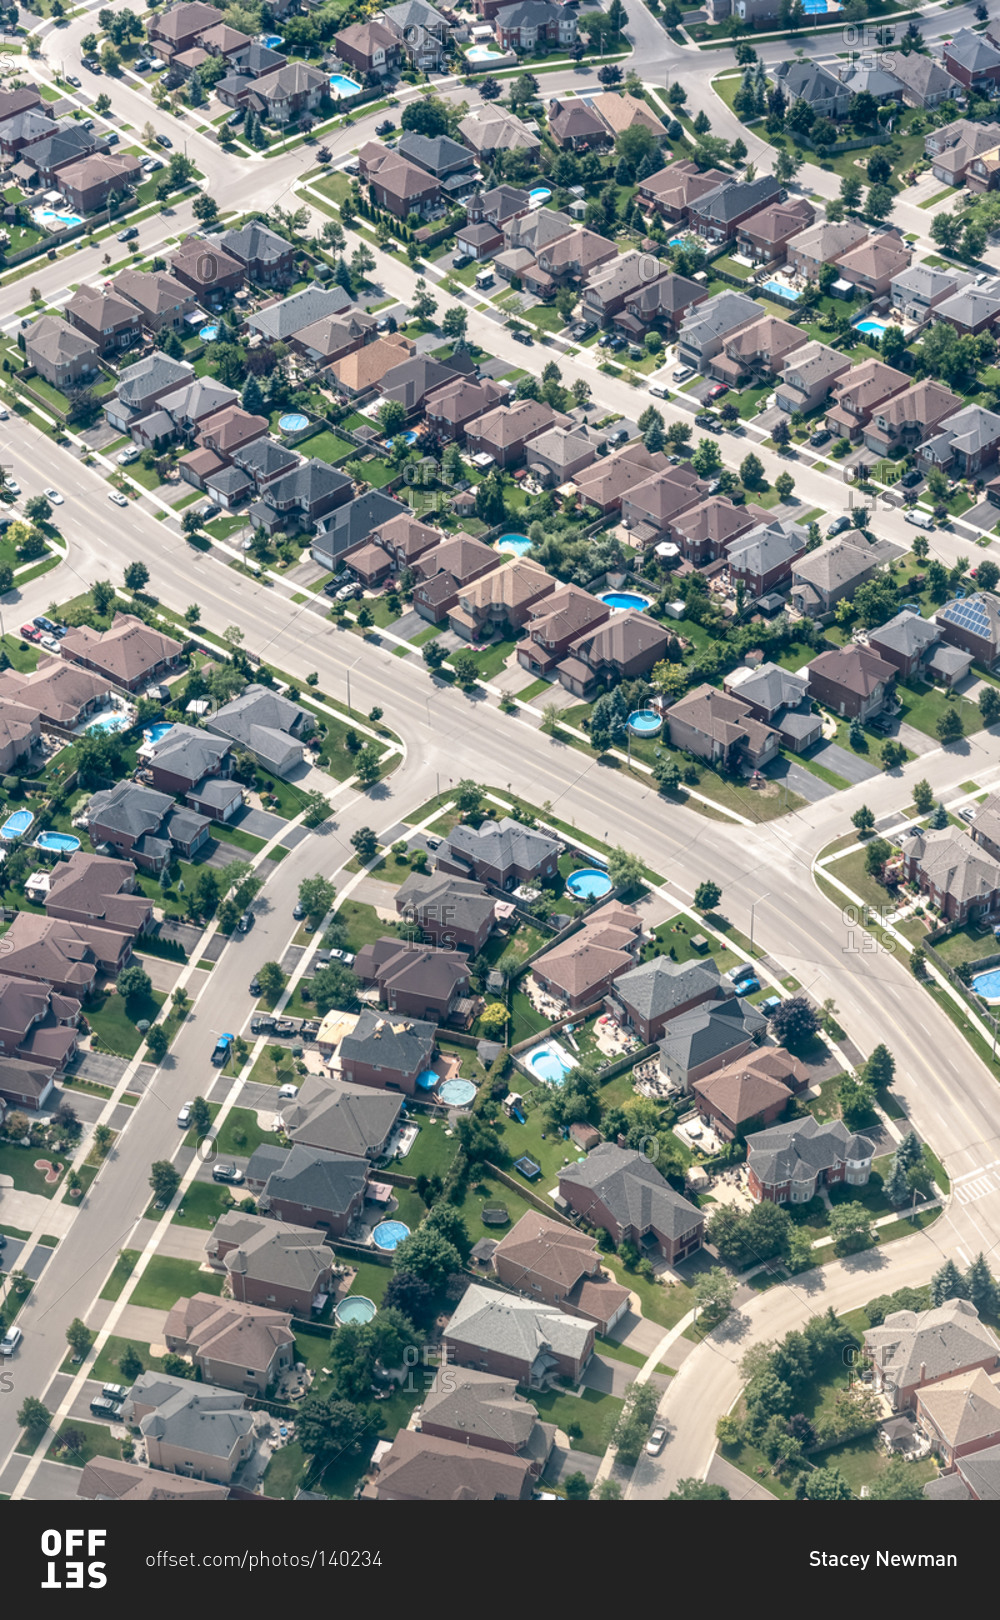 An aerial view of a crowded, upscale subdivision